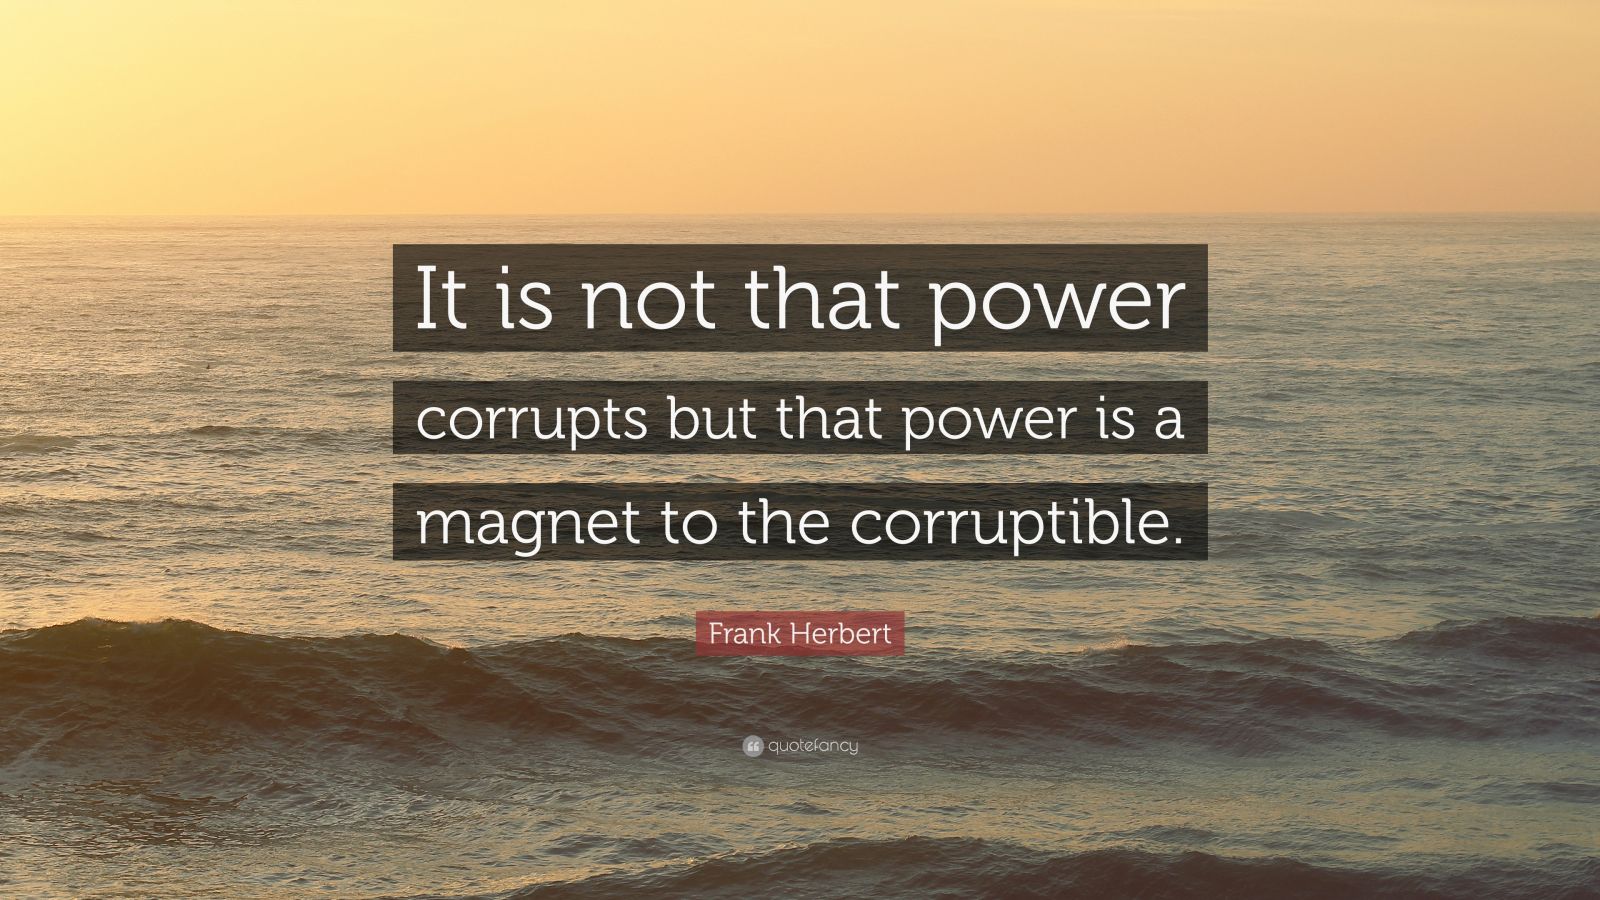 Frank Herbert Quote “It is not that power corrupts but